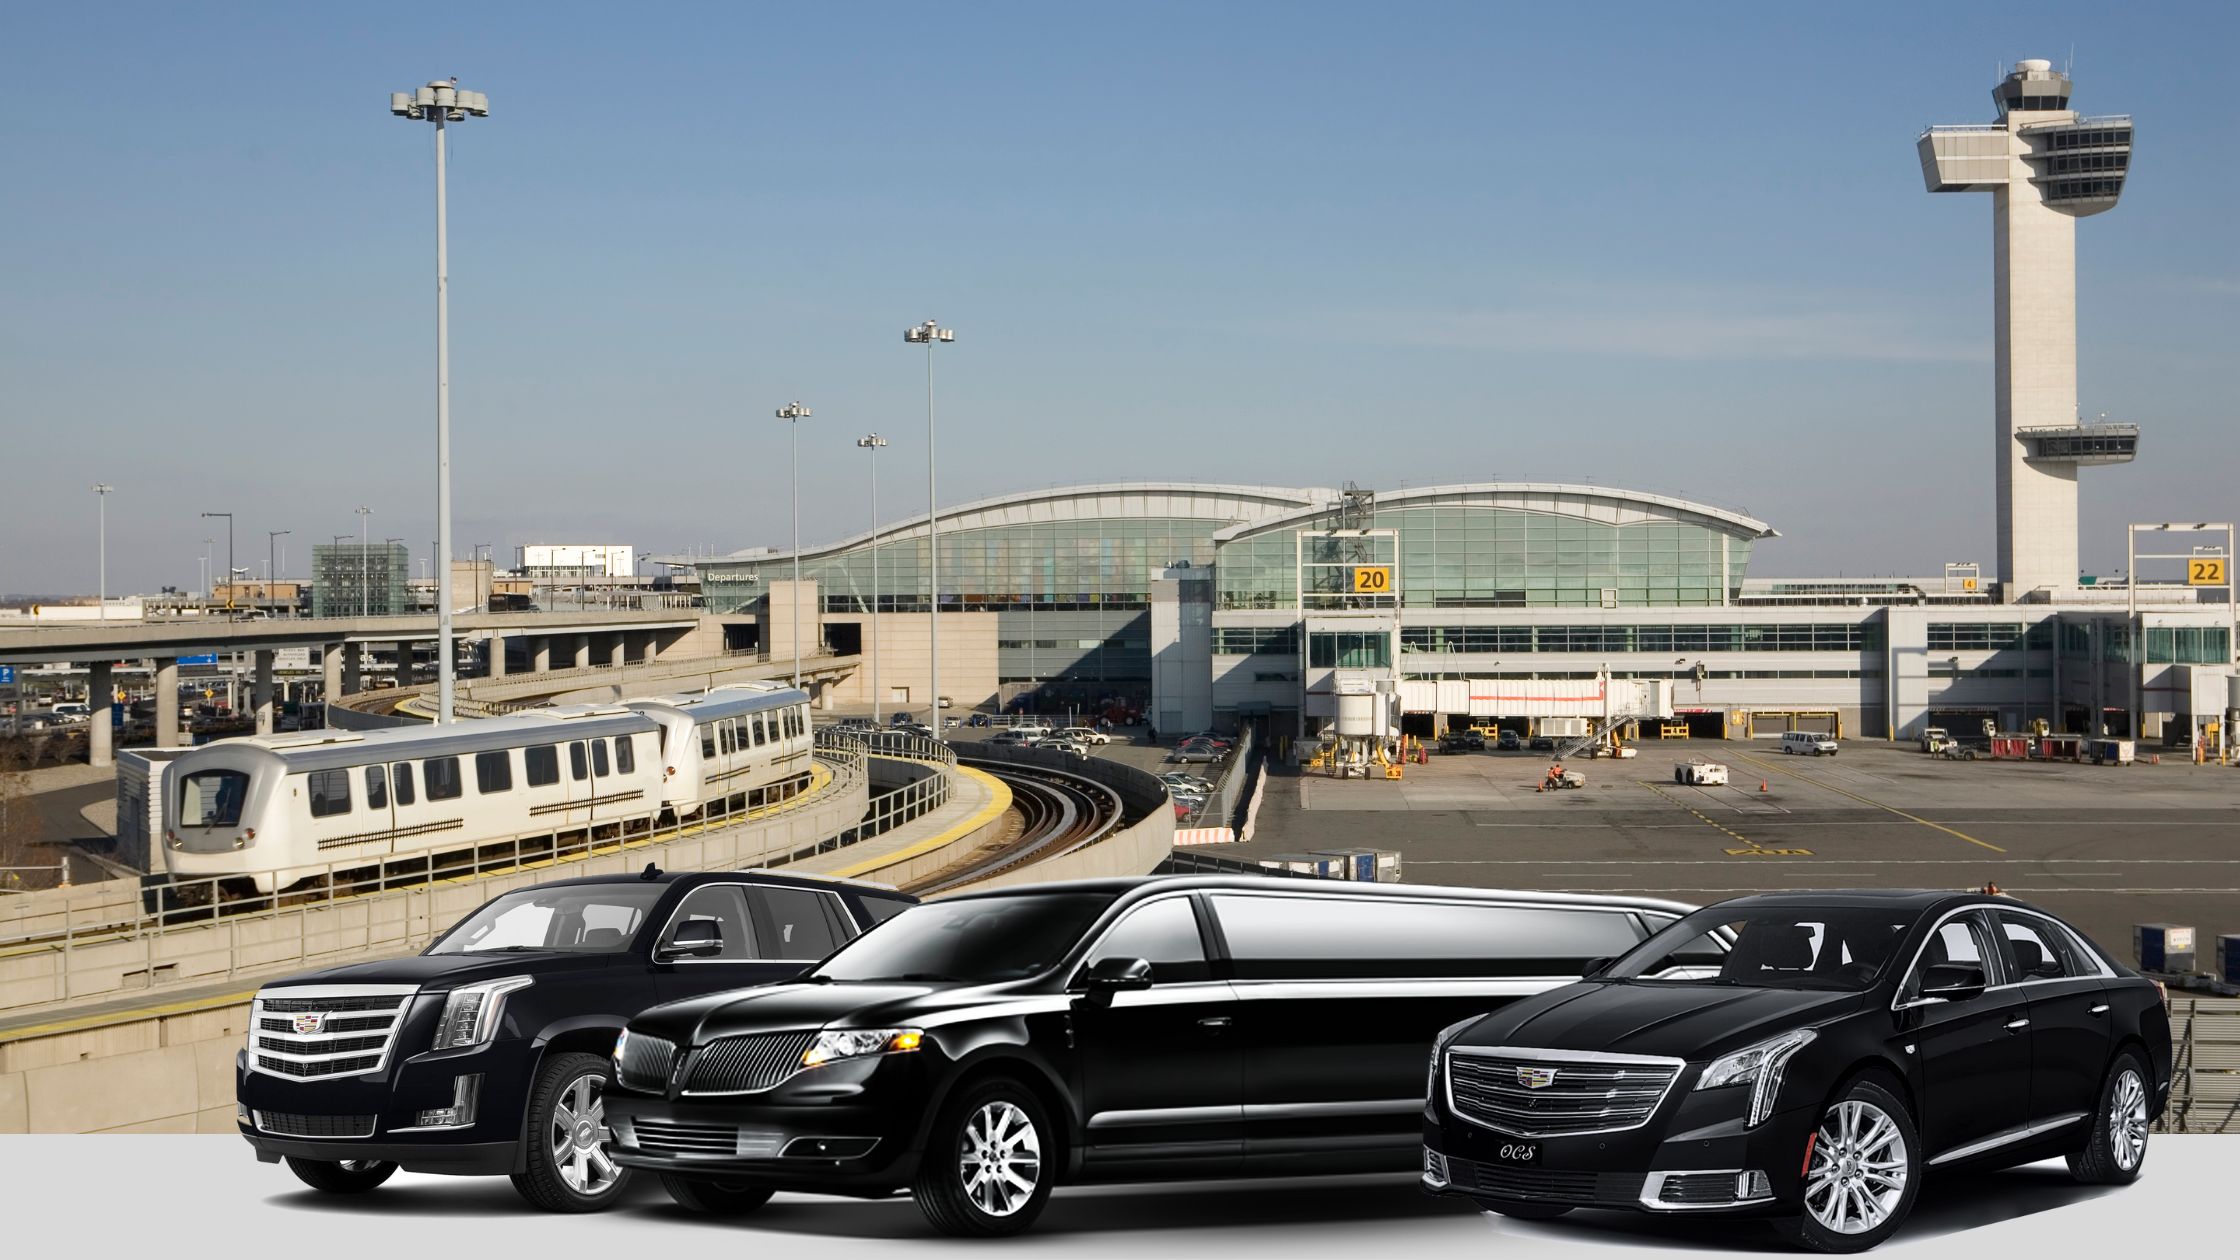 JFK to Hyatt Centric Times Square Limo Service | Luxury NYC Transfers & More